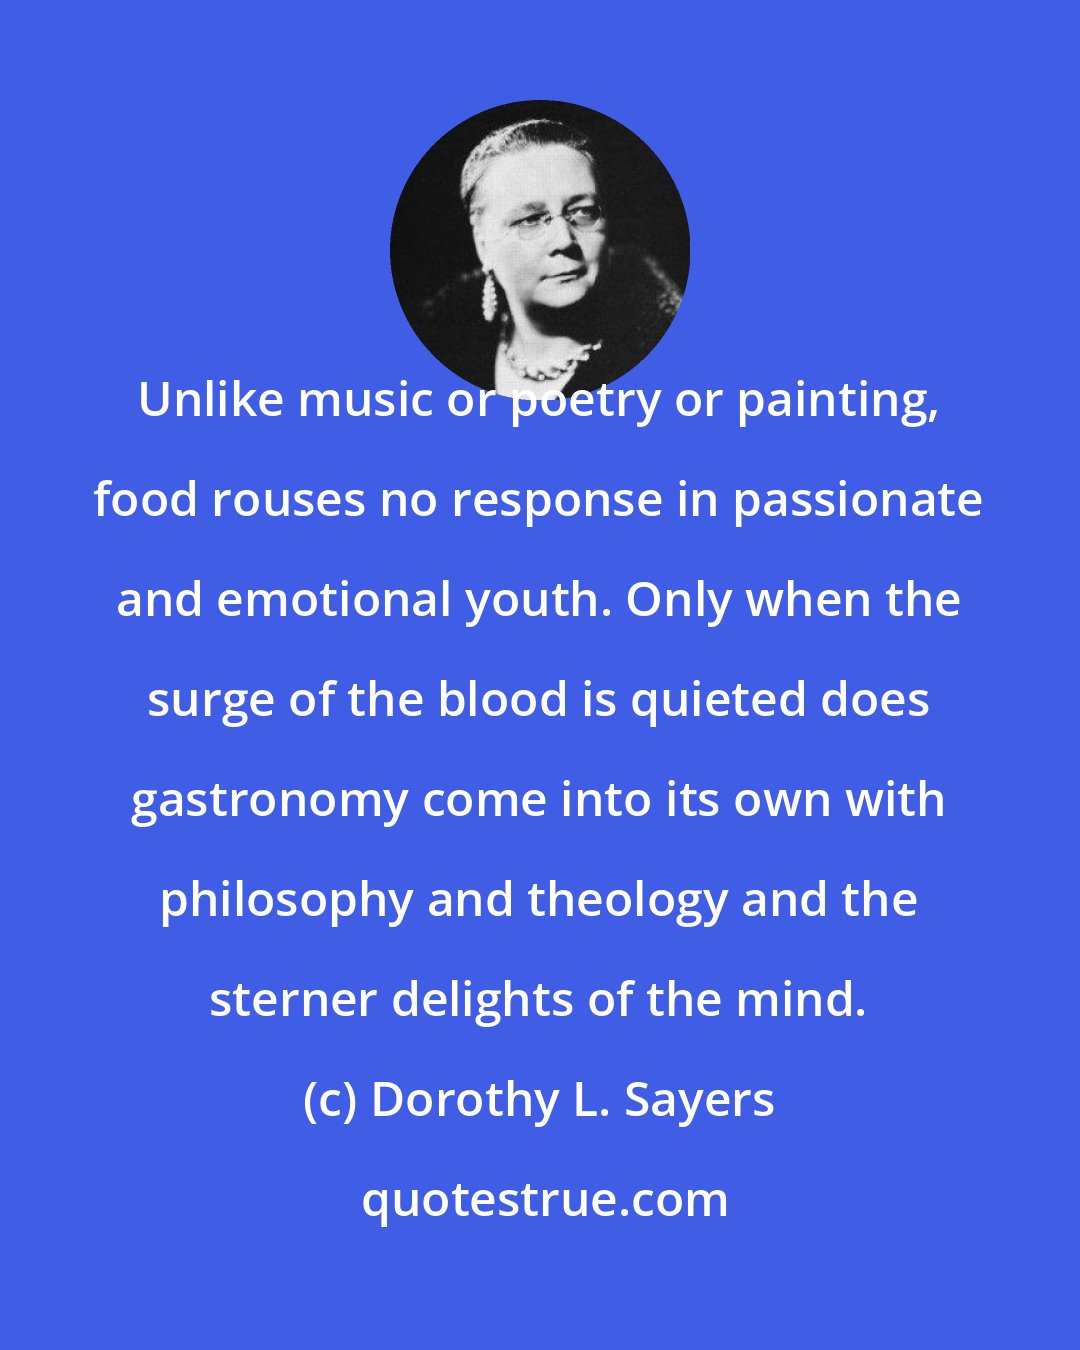 Dorothy L. Sayers: Unlike music or poetry or painting, food rouses no response in passionate and emotional youth. Only when the surge of the blood is quieted does gastronomy come into its own with philosophy and theology and the sterner delights of the mind.